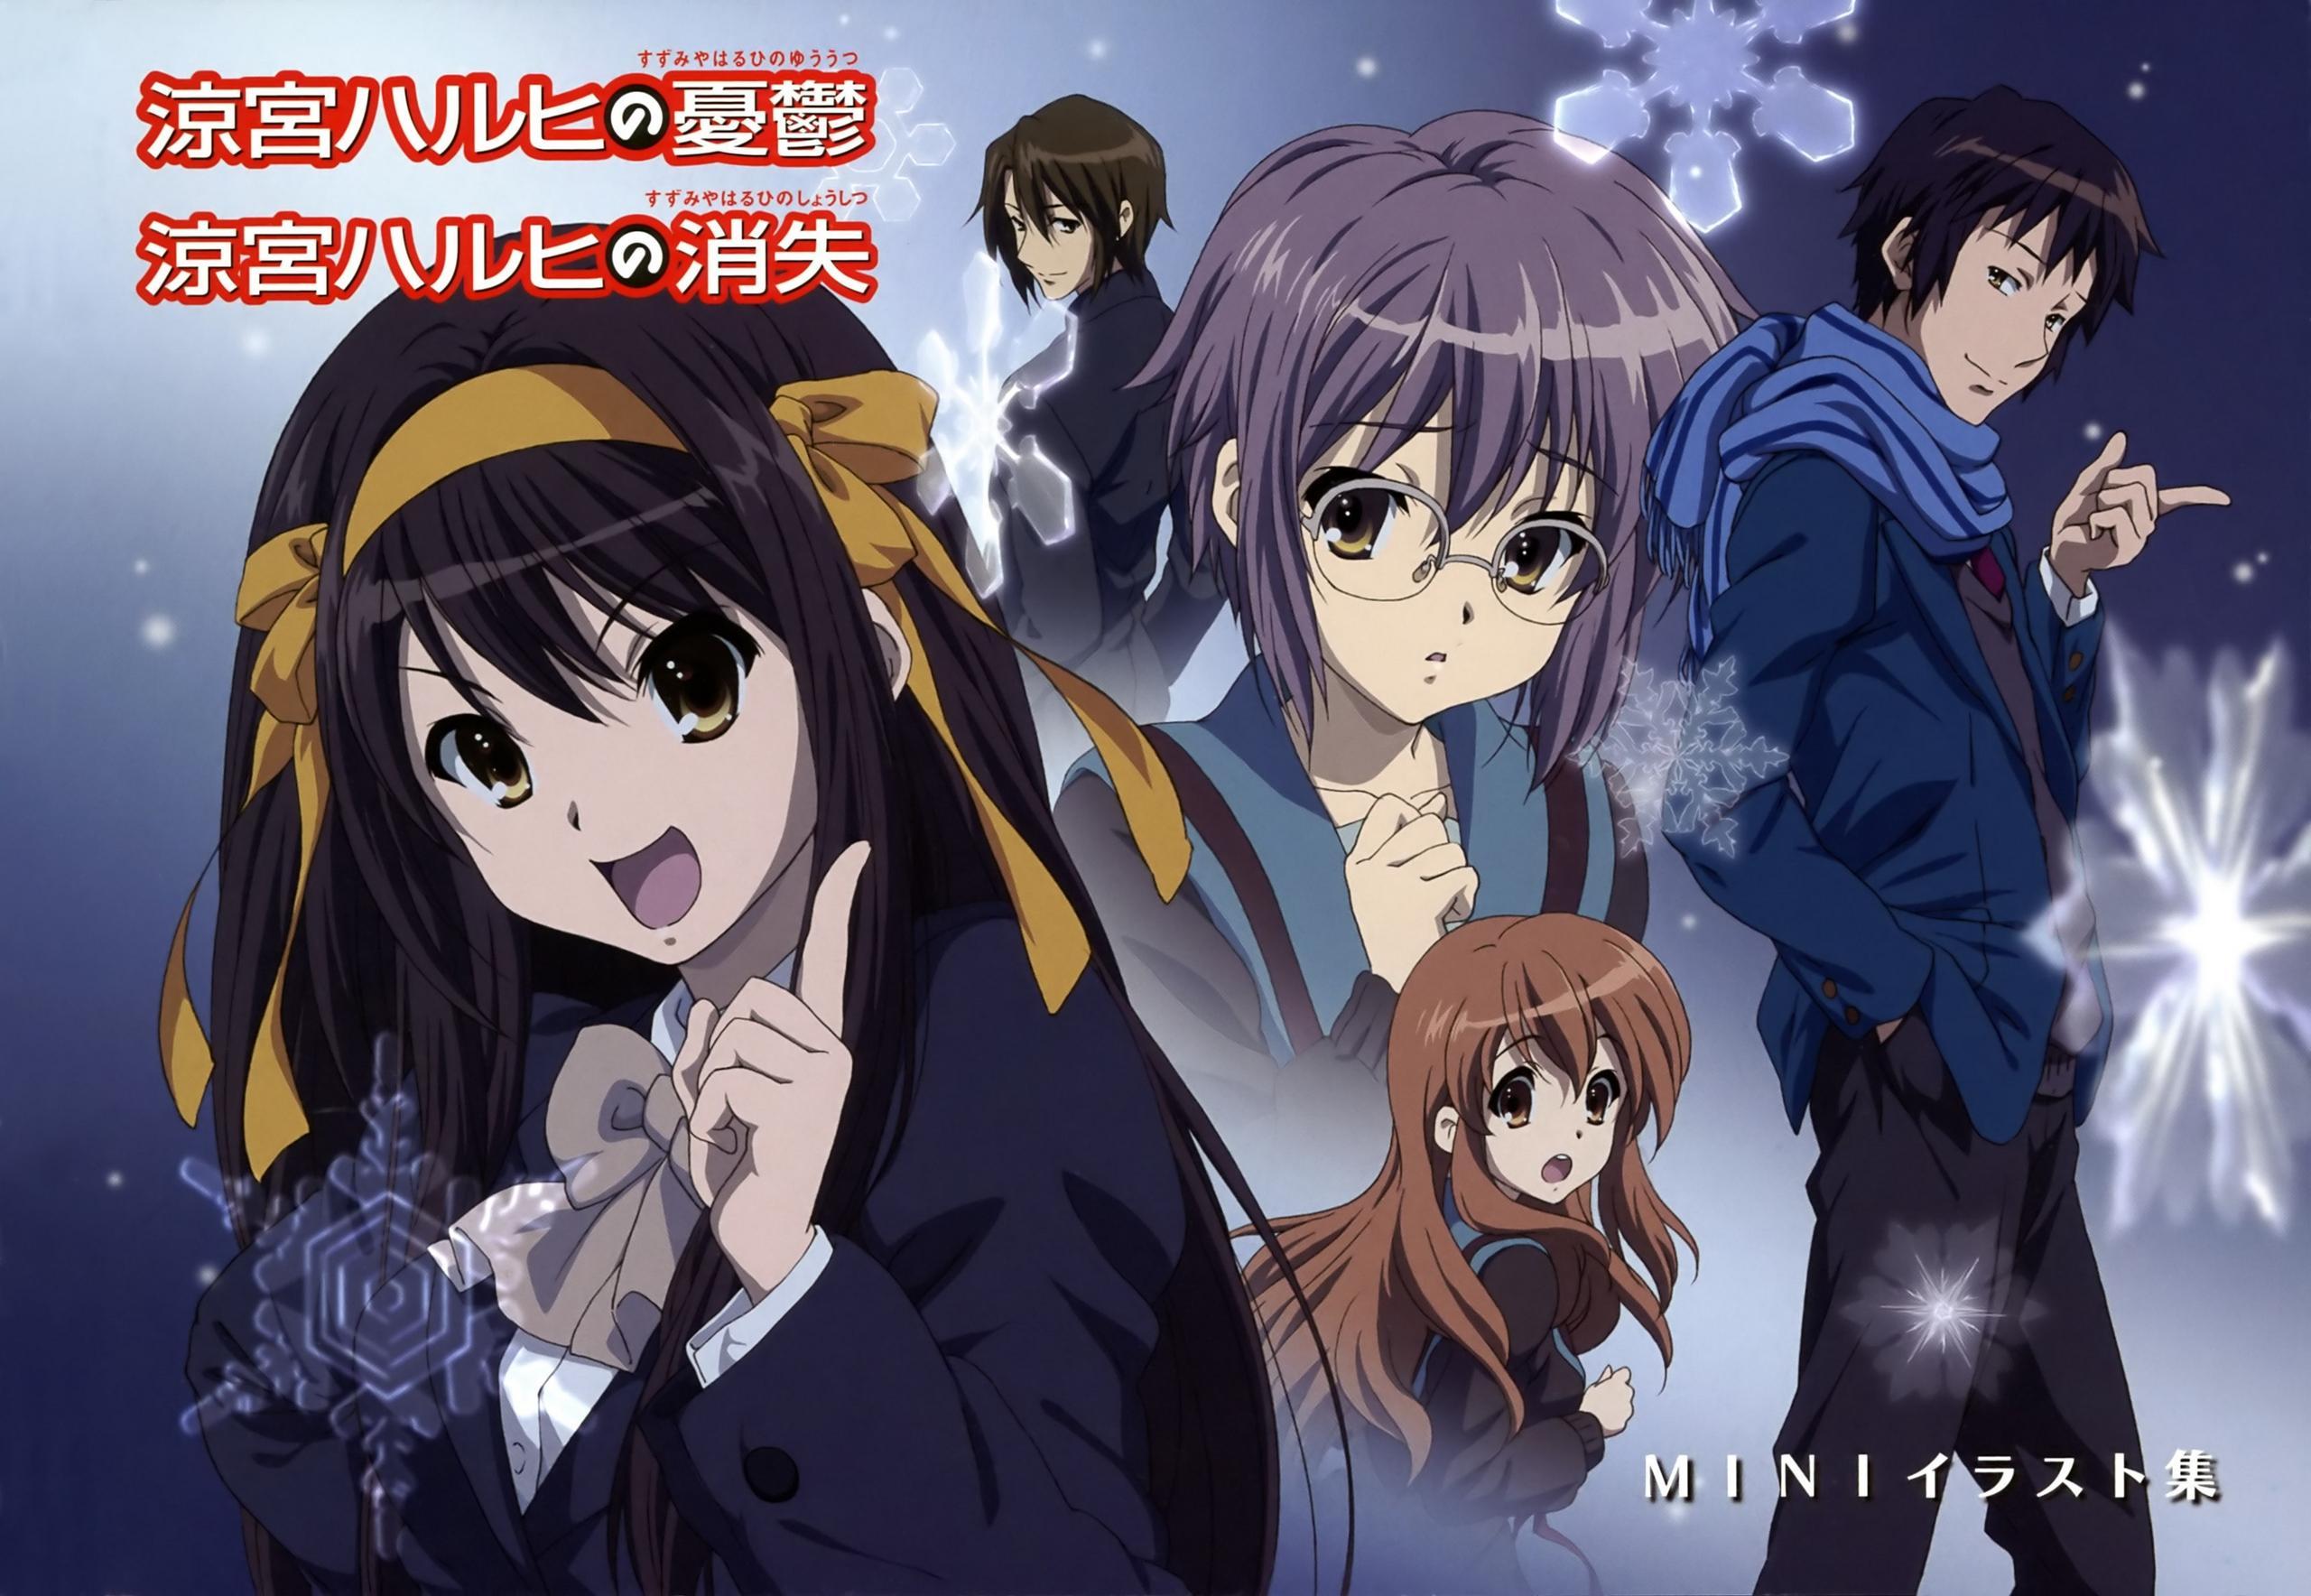 The Disappearance of Haruhi Suzumiya image The Disappearance